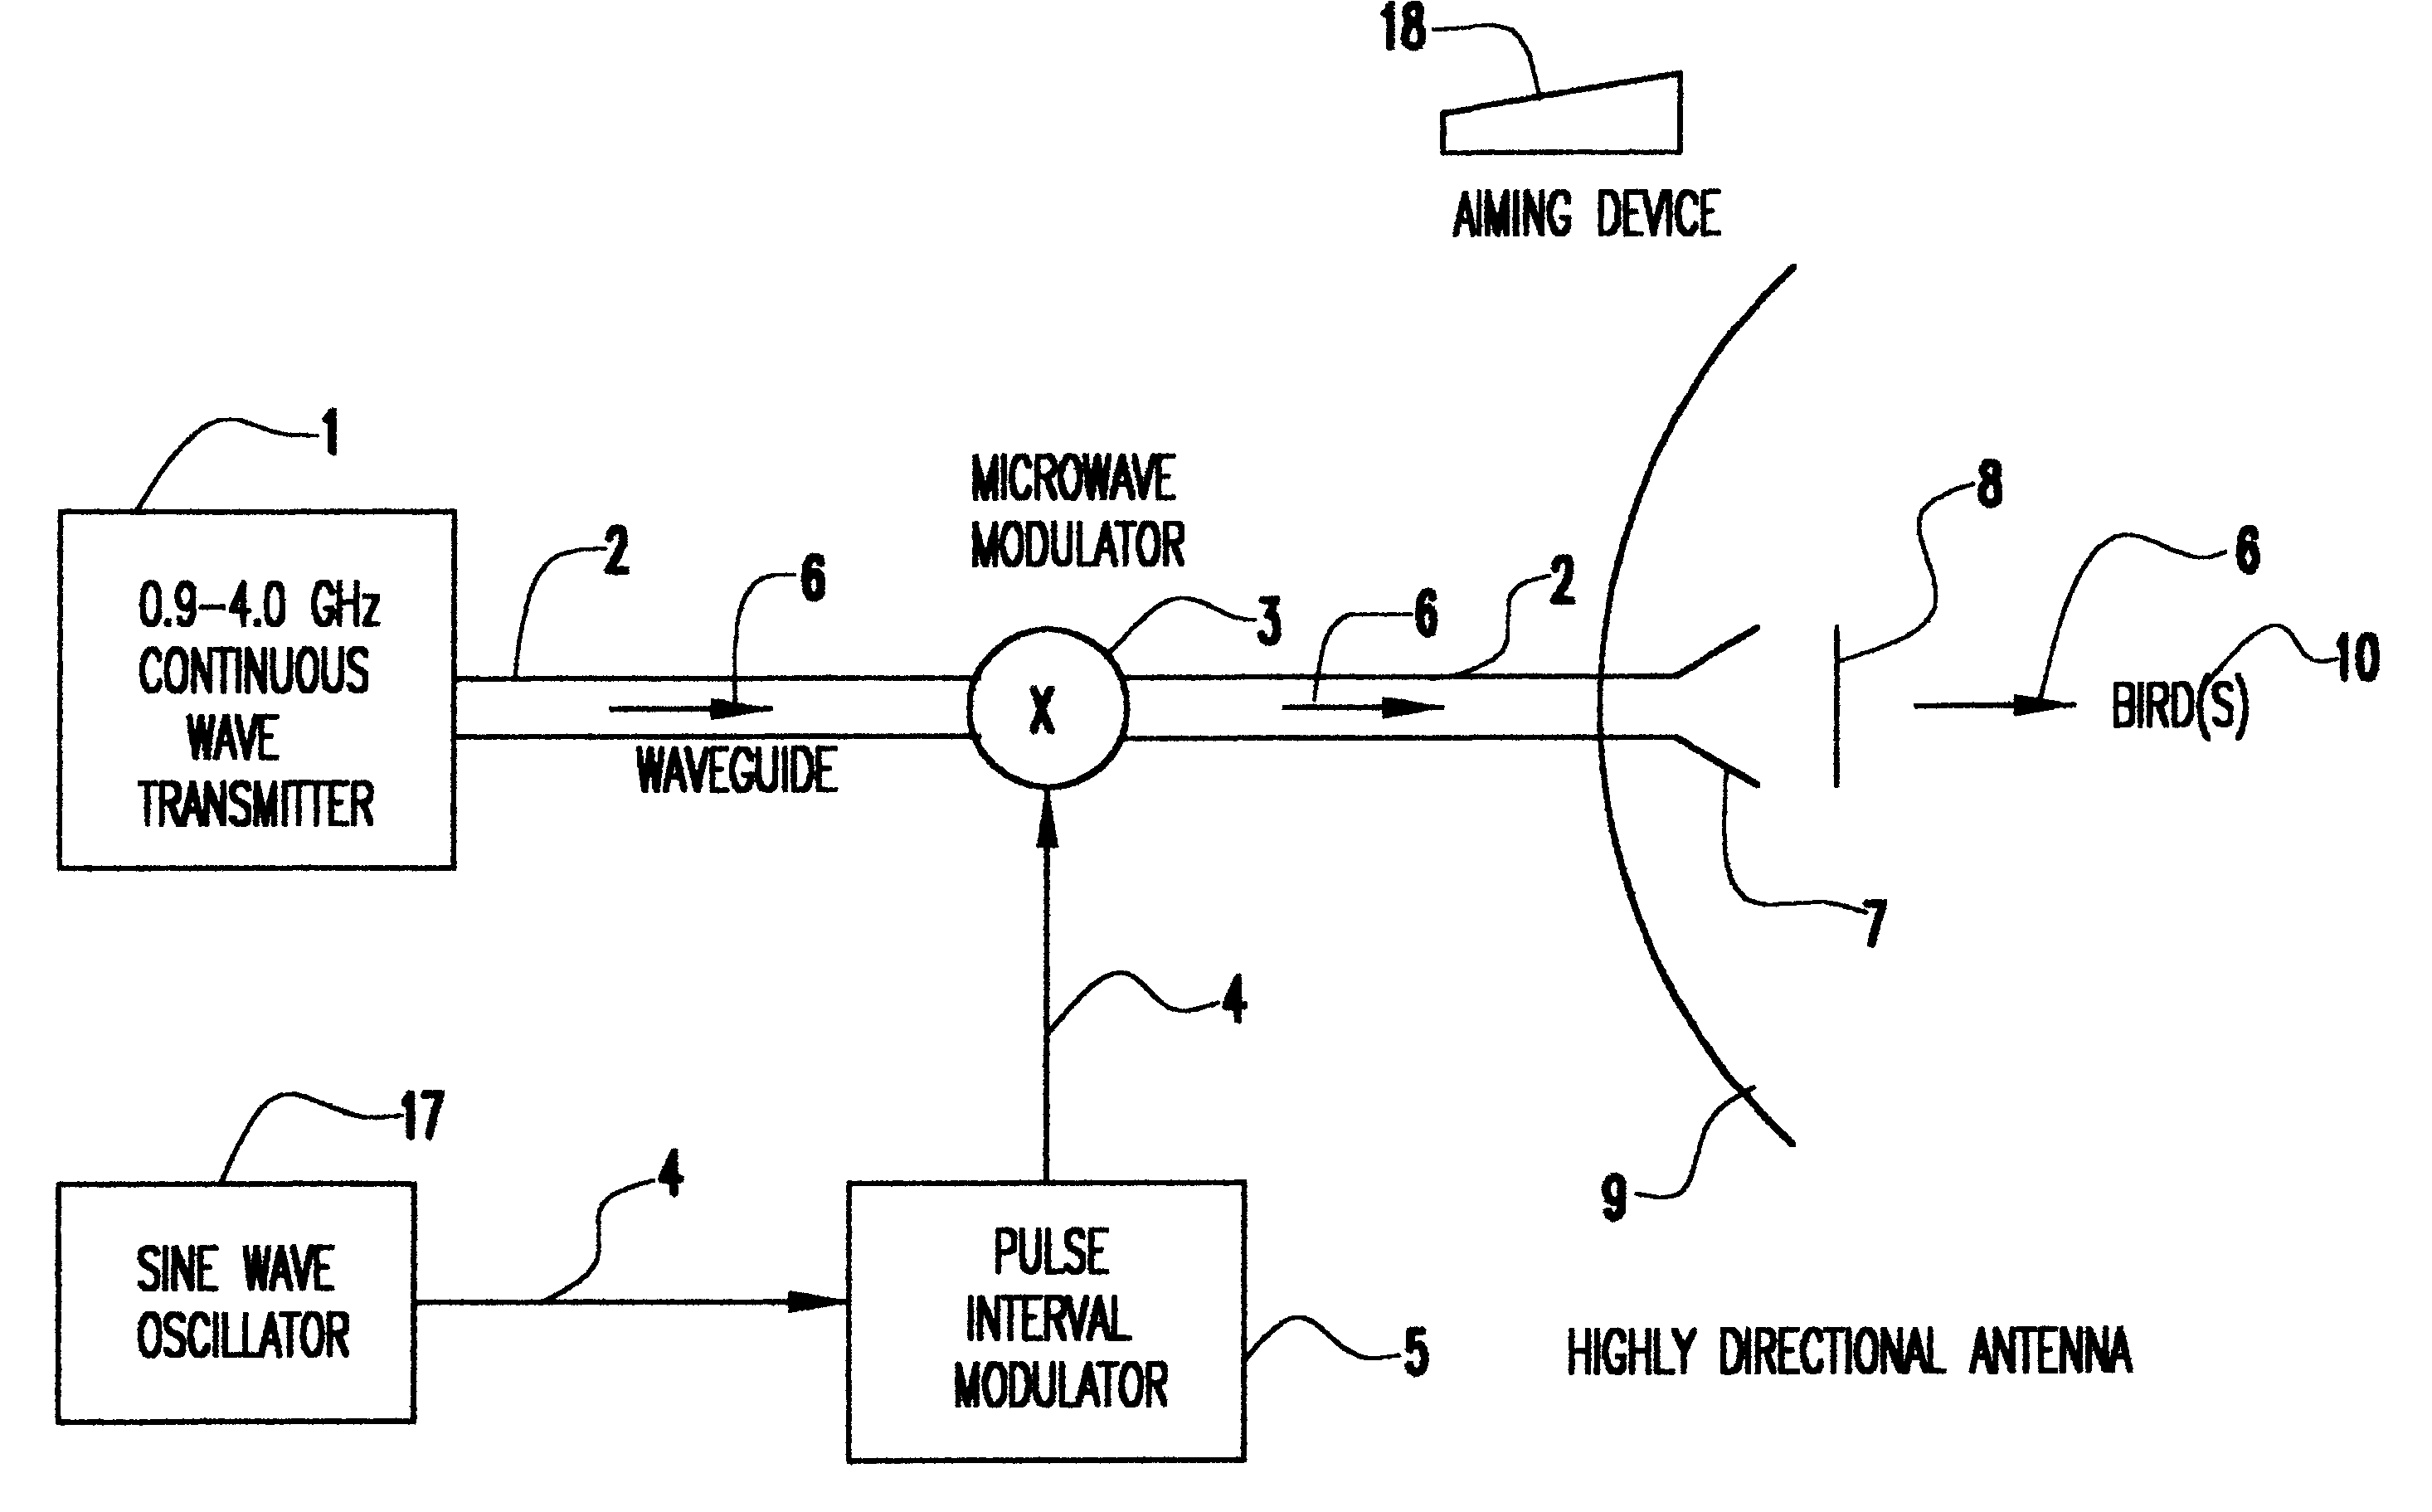 Methods and apparatus for alerting and/or repelling birds and other animals